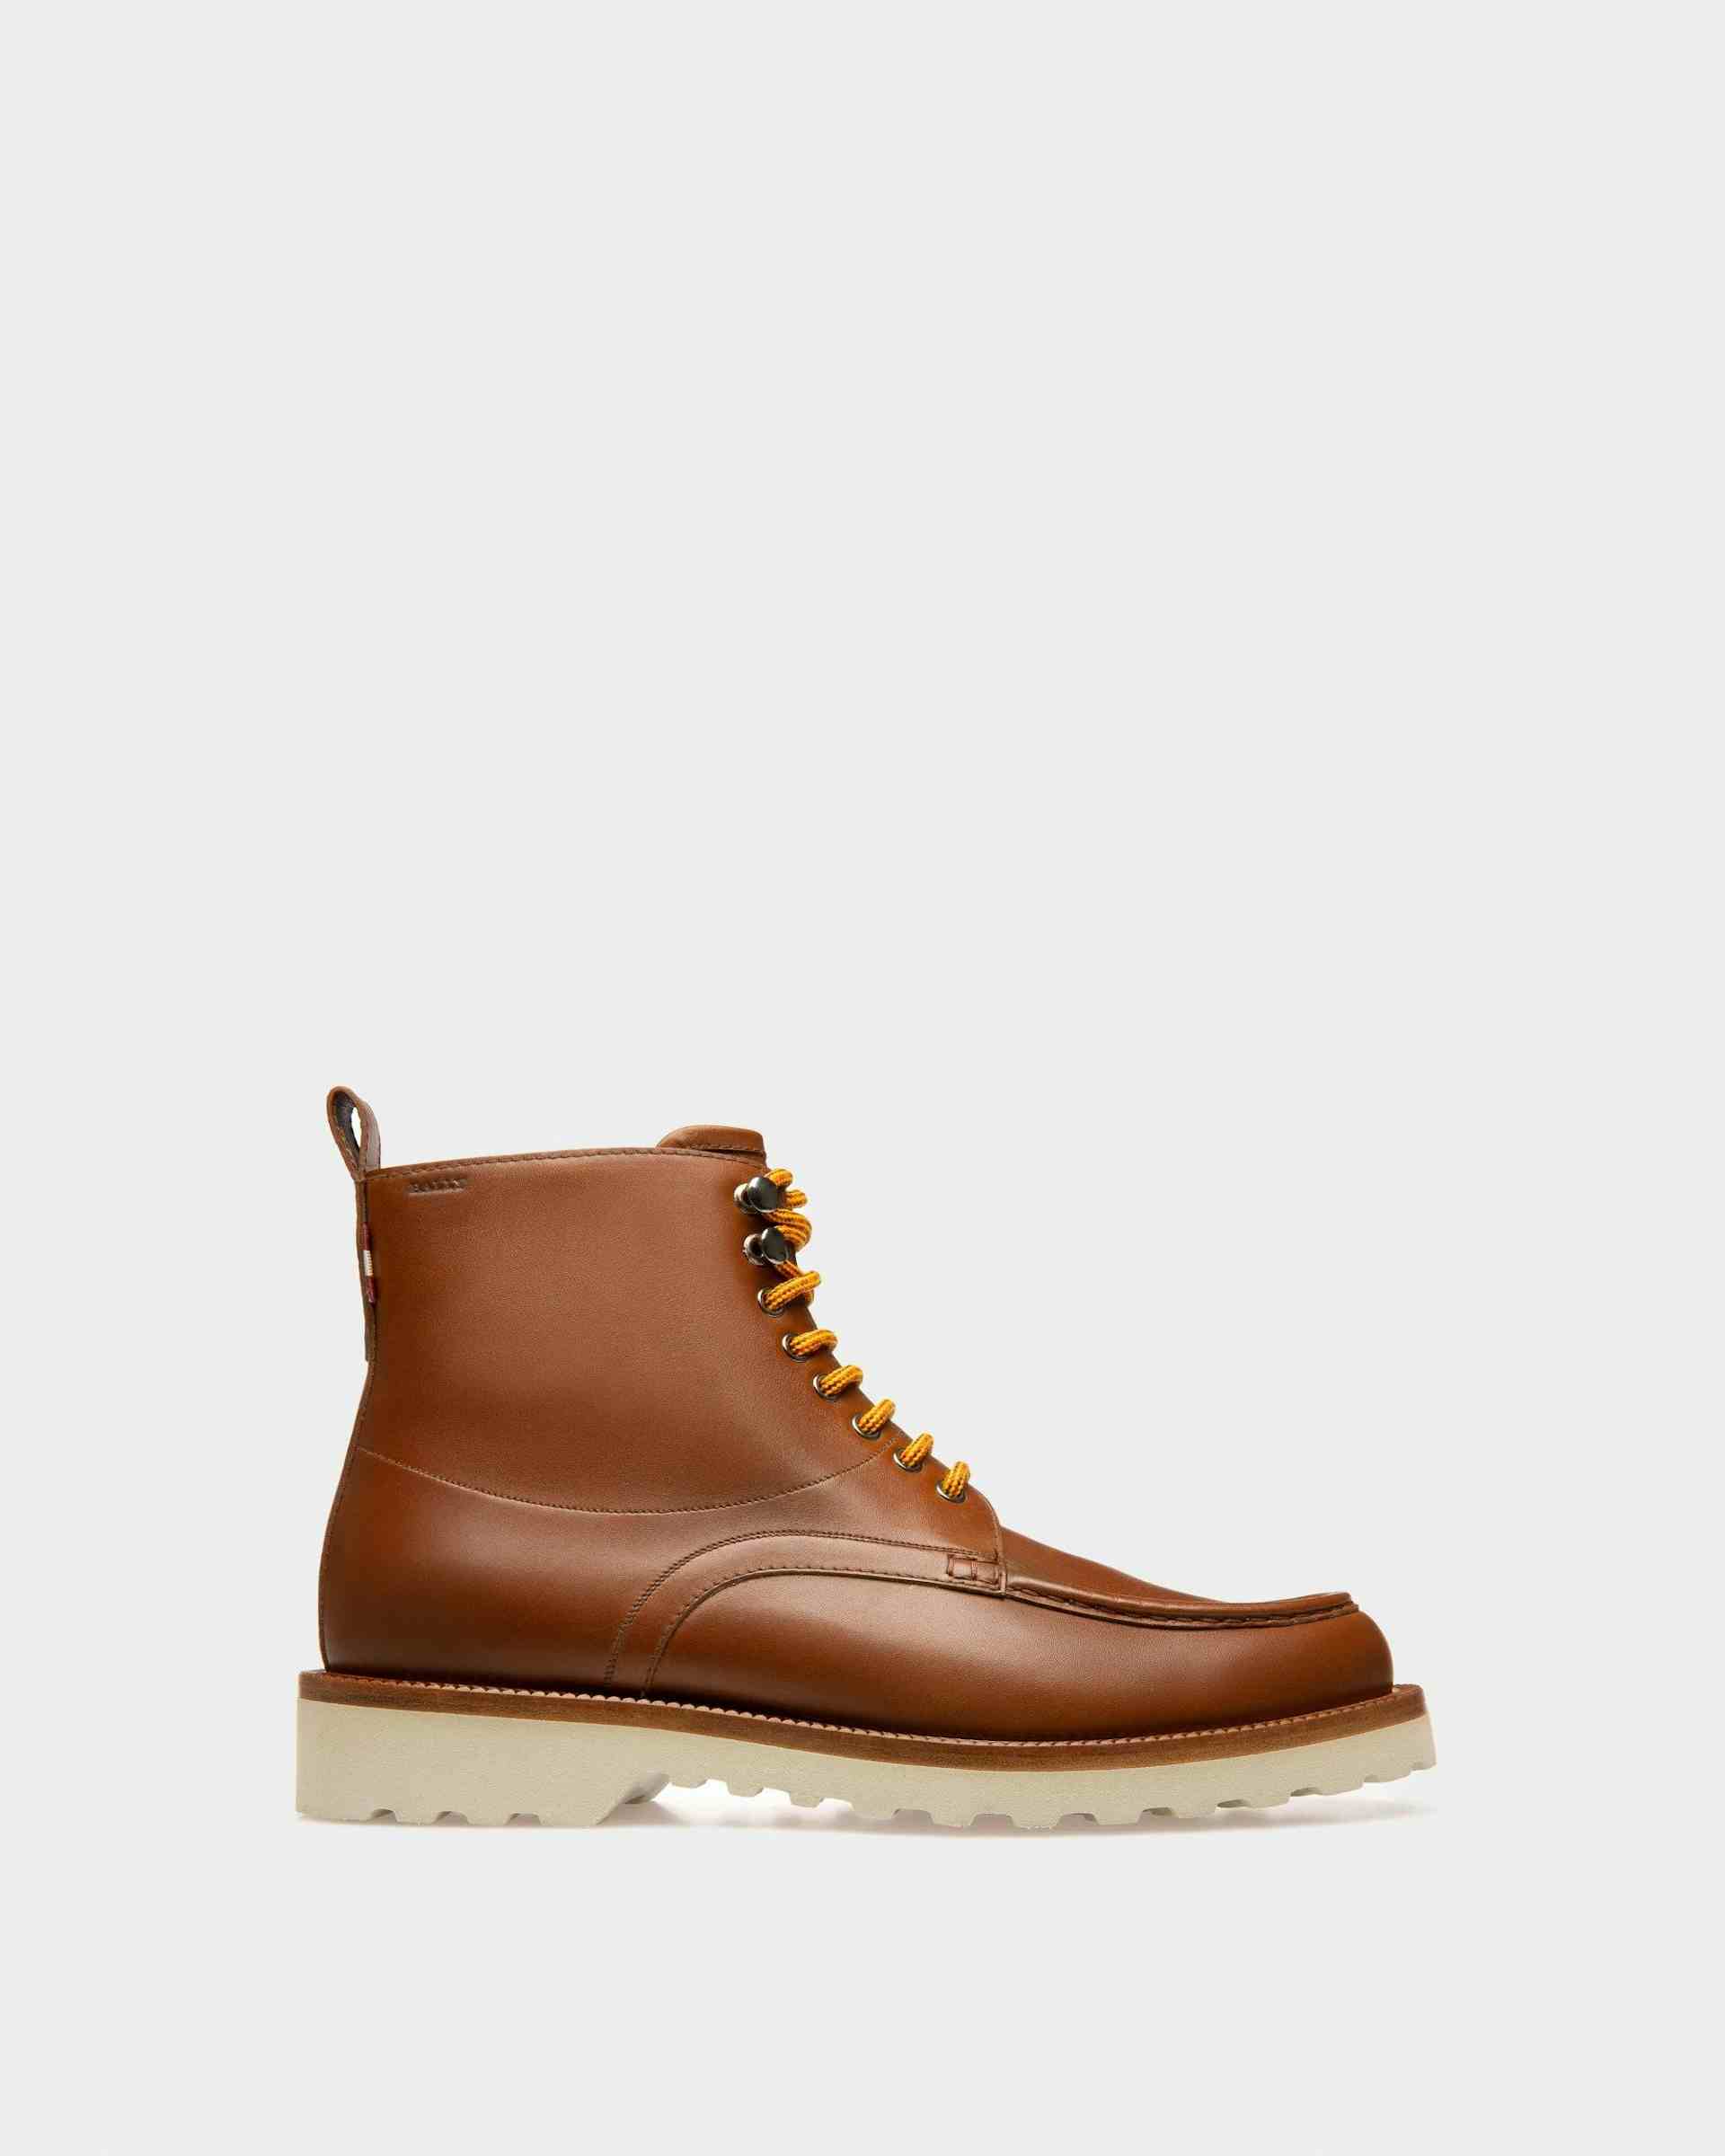 Nobilus Leather Boots In Brown - Men's - Bally